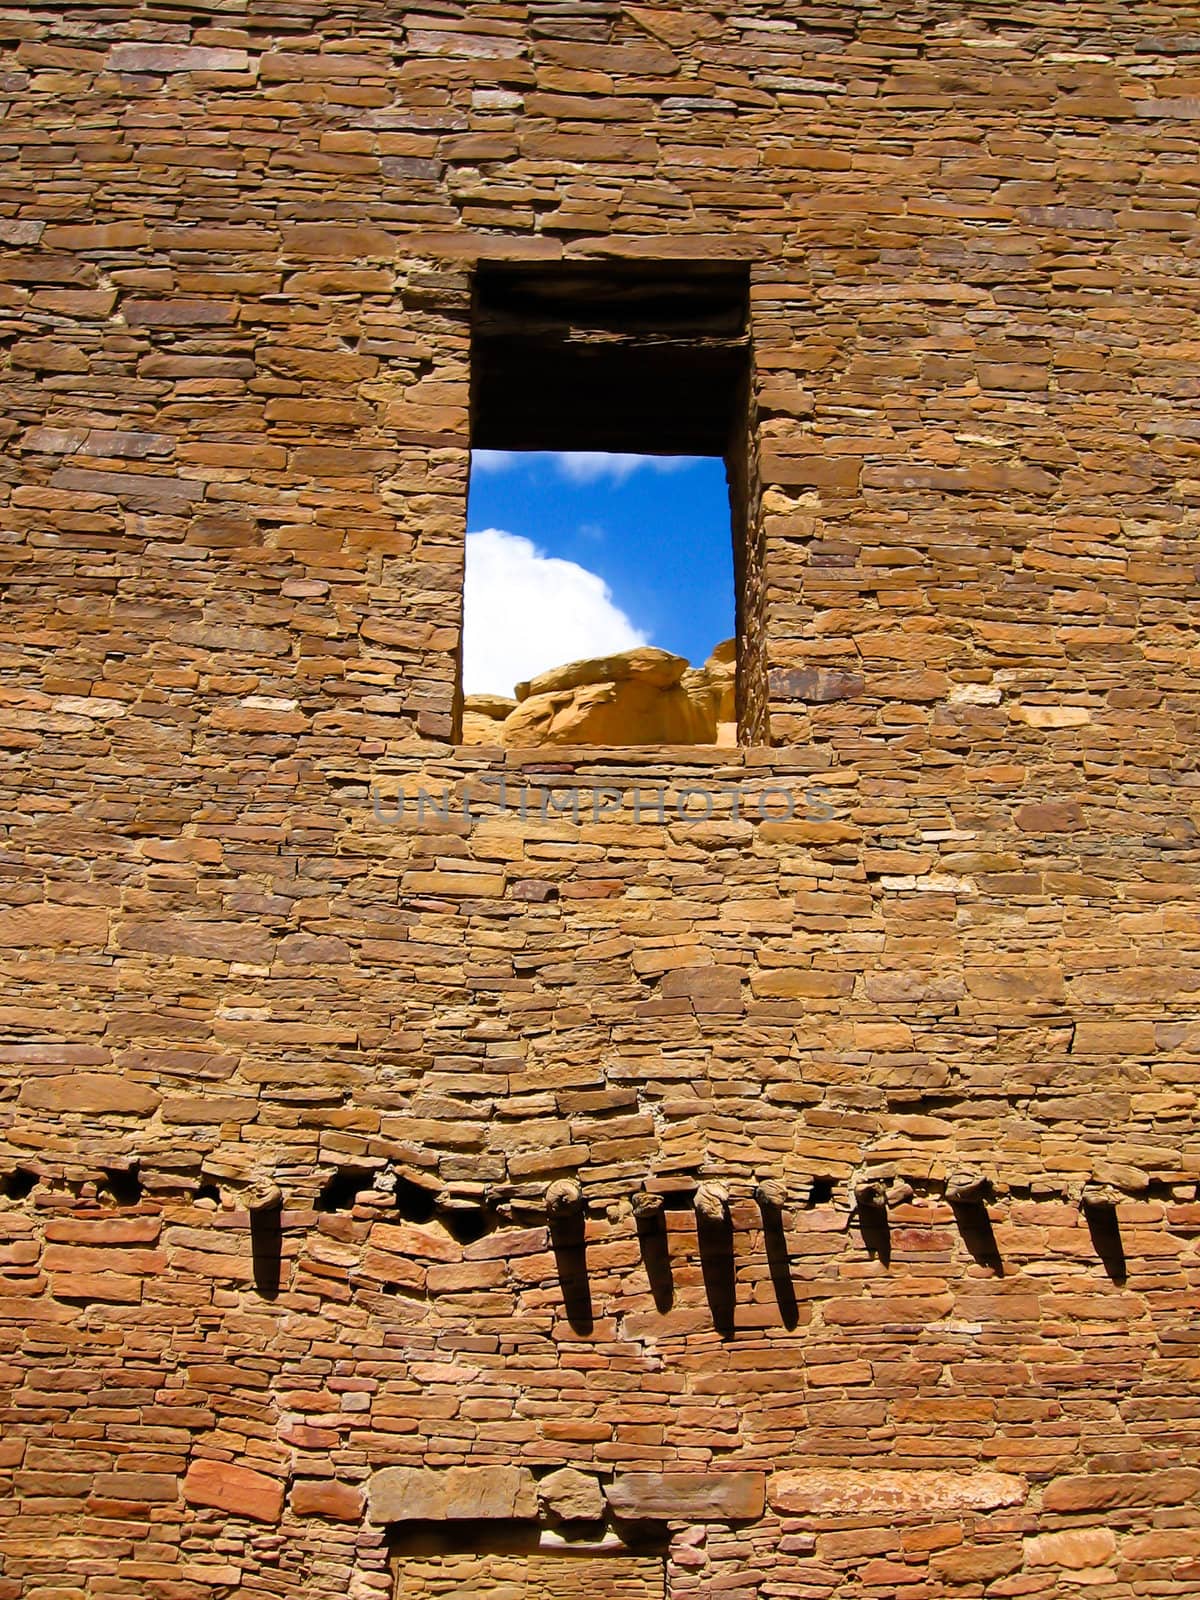 Ruin wall with window opening of laid sandstone bricks of pueblo bonito in chaco canyon, New Mexico, USA, the centre of sunken Anasazi Culture of ancestral native Americans.